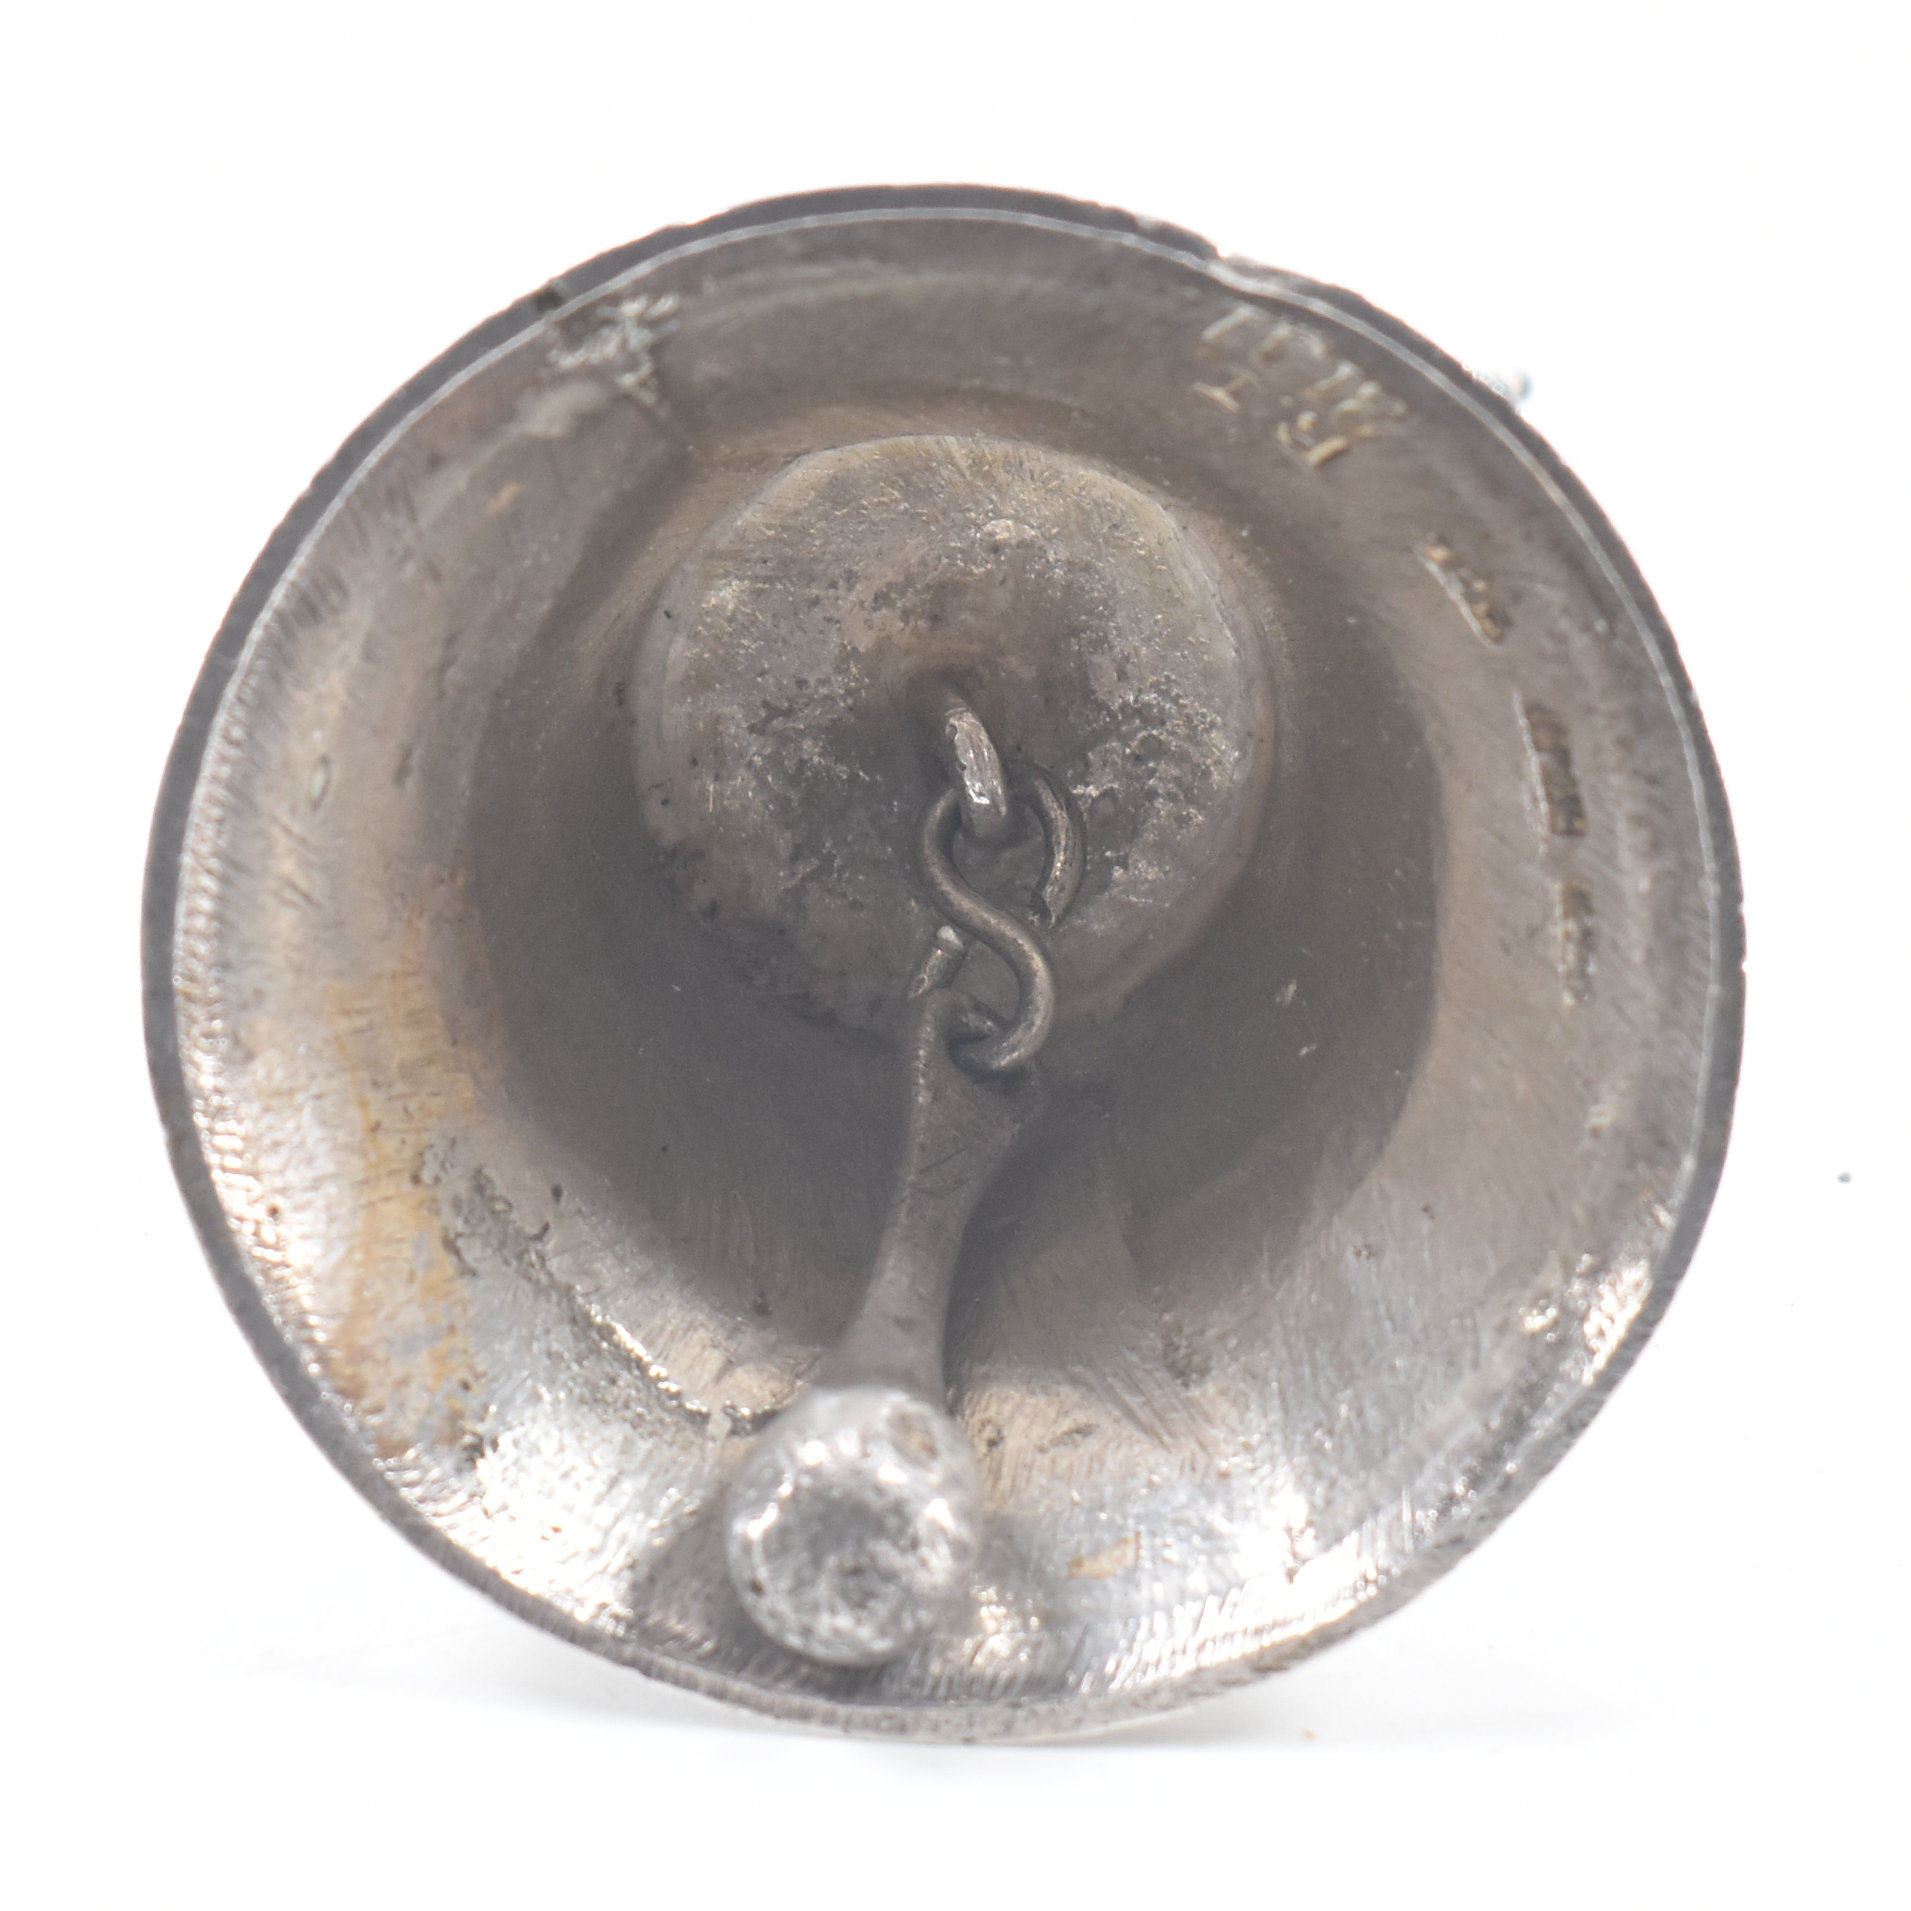 925 SILVER CUP BOWL & LAMA HANDLED BELL - Image 8 of 9